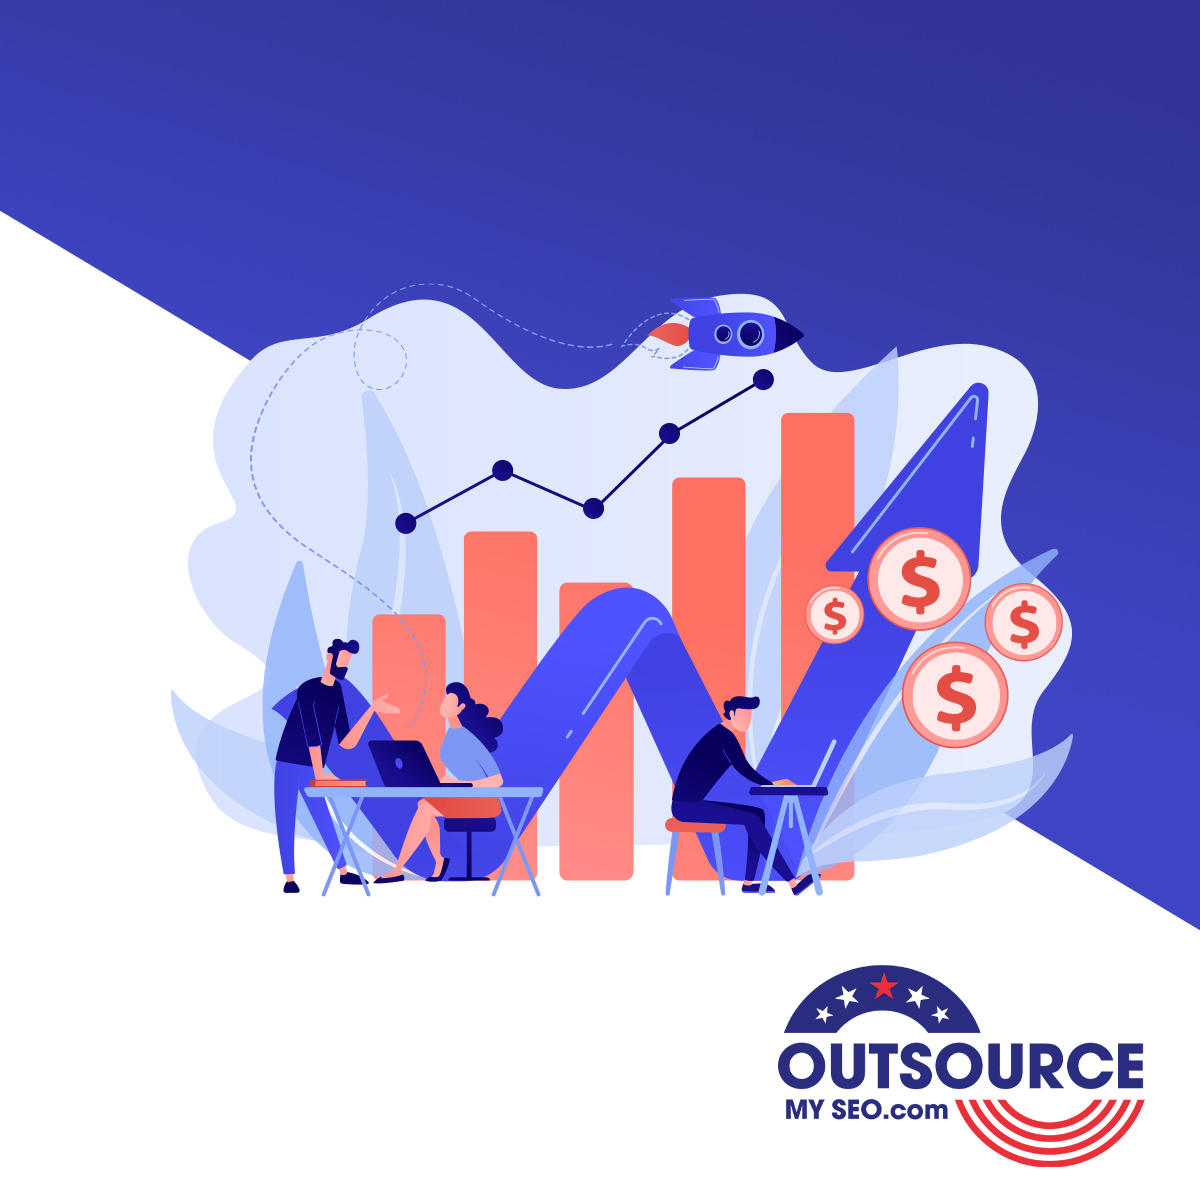 Transform your agency's SEO offerings overnight 🌙✨ with our White Label SEO services. Outsource your SEO to us and watch your client list grow!  bit.ly/40ViGUB #SEOOutsourcing #WhiteLabelSEO #AgencyGrowth #outsourceseo #seotips #agency